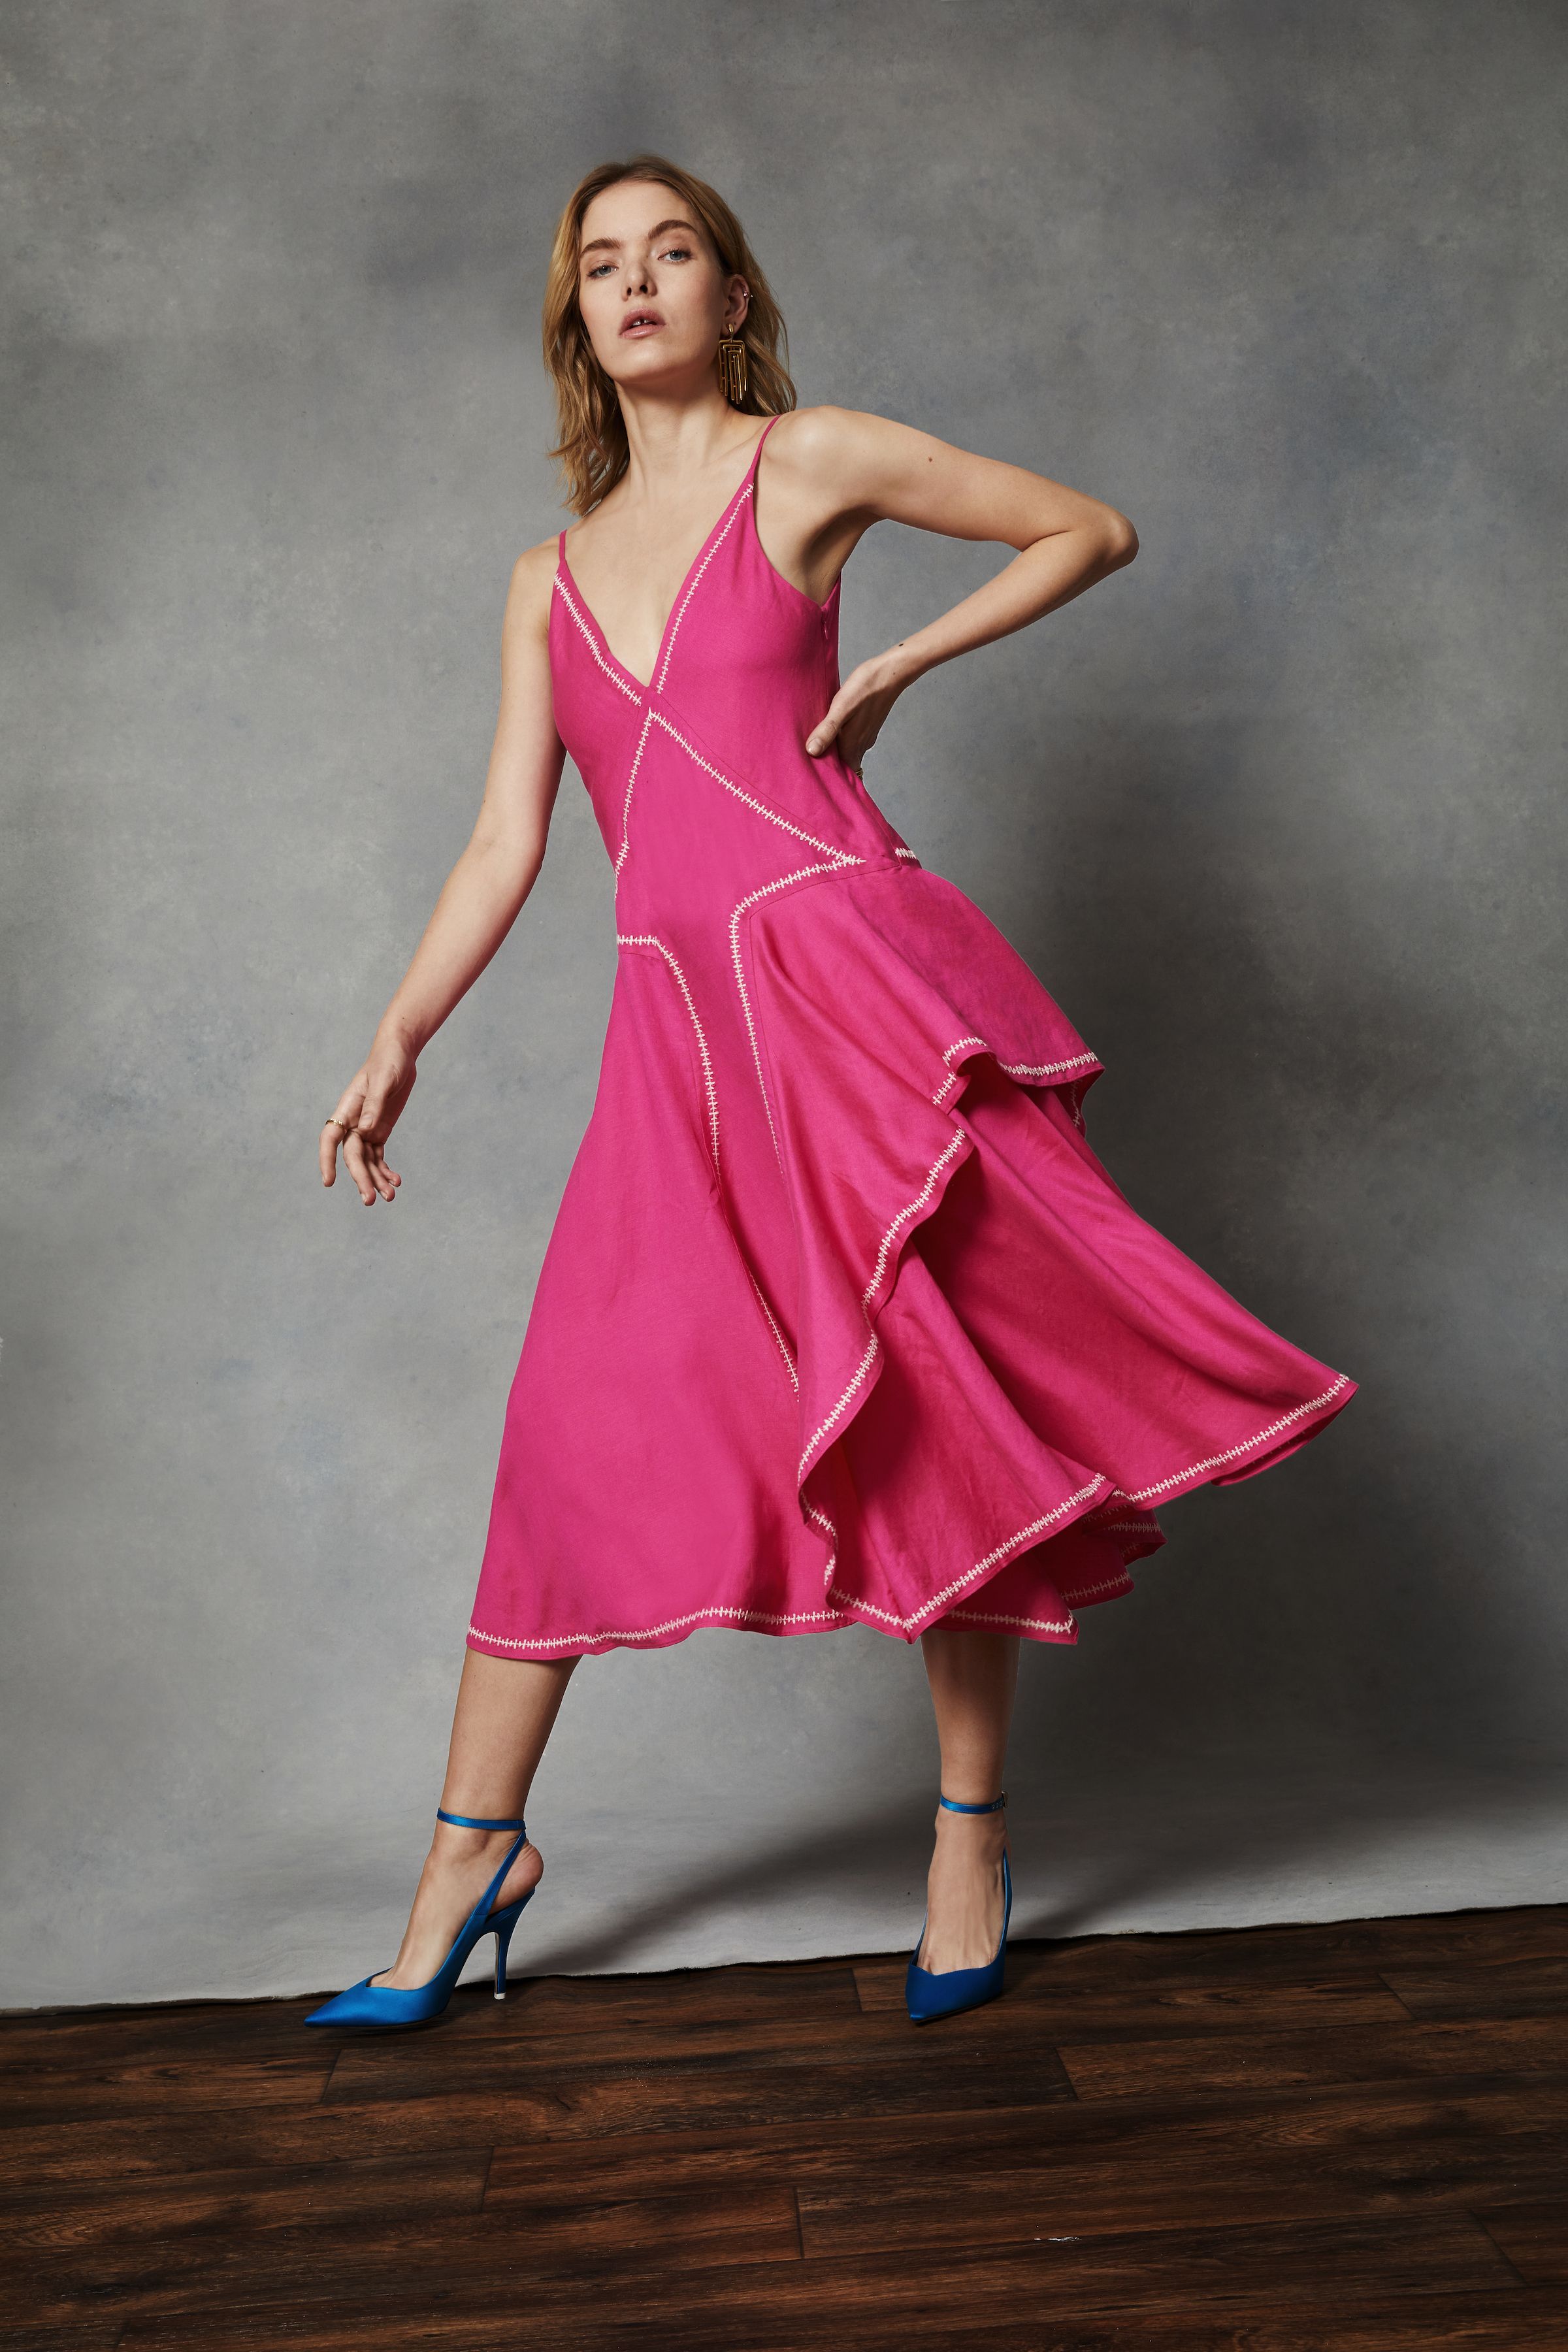 Rent the Runway Is Launching 'Tastemaker' Collabs, Starting With